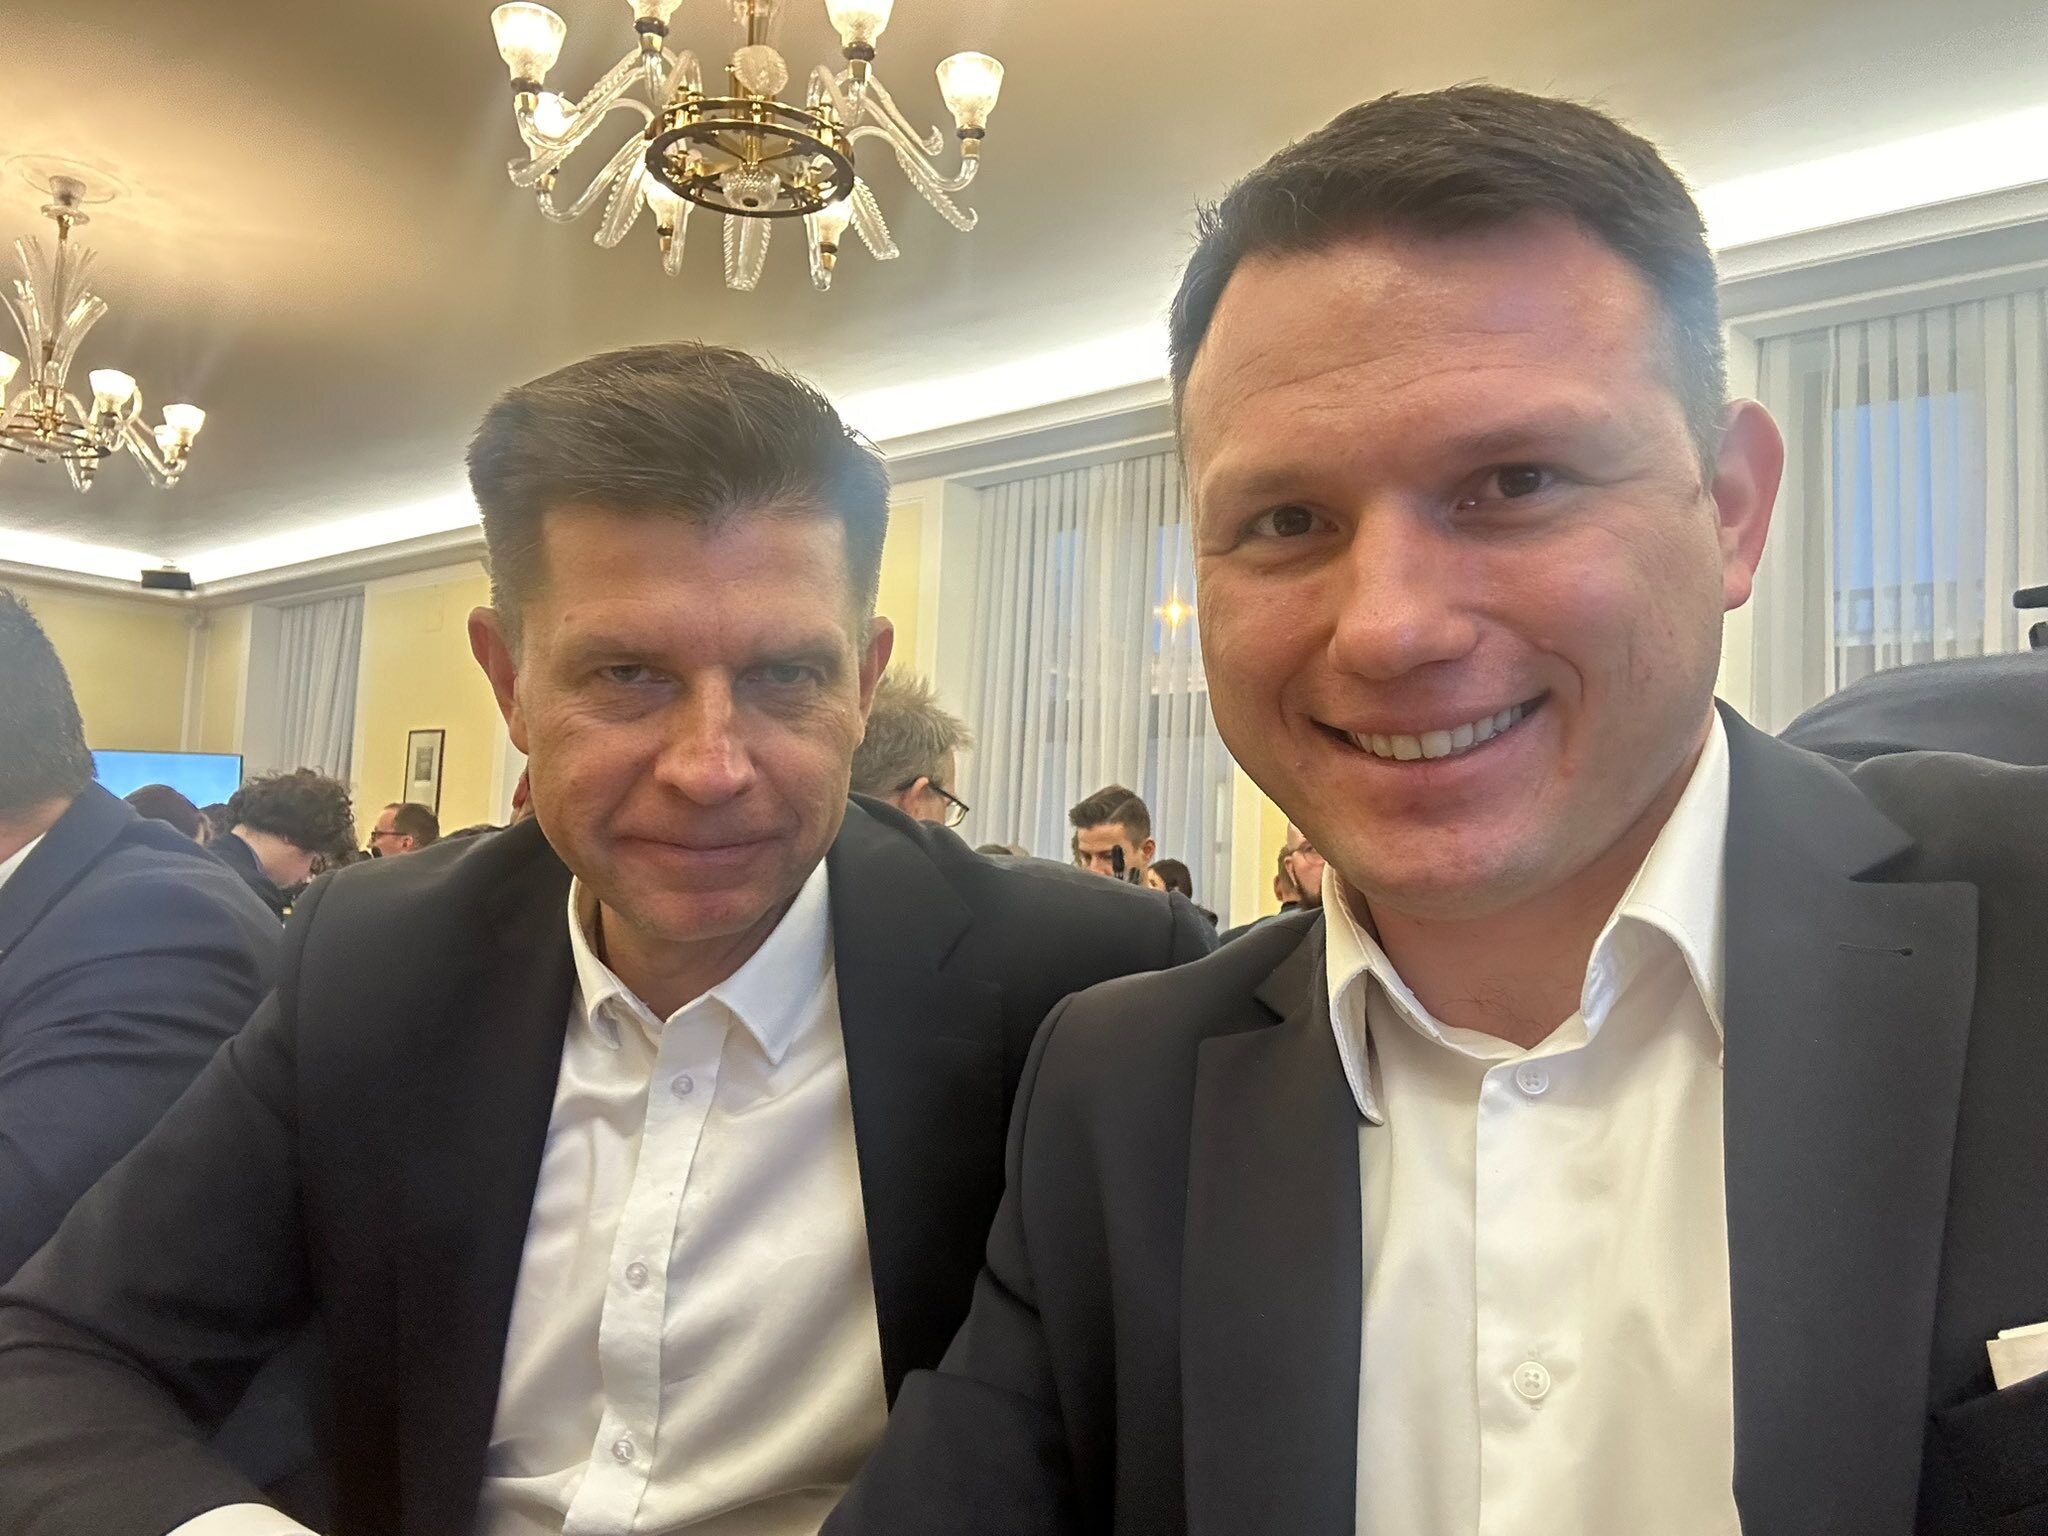 Christmas miracles in the Sejm?  Petru and Mentzen posted a photo together